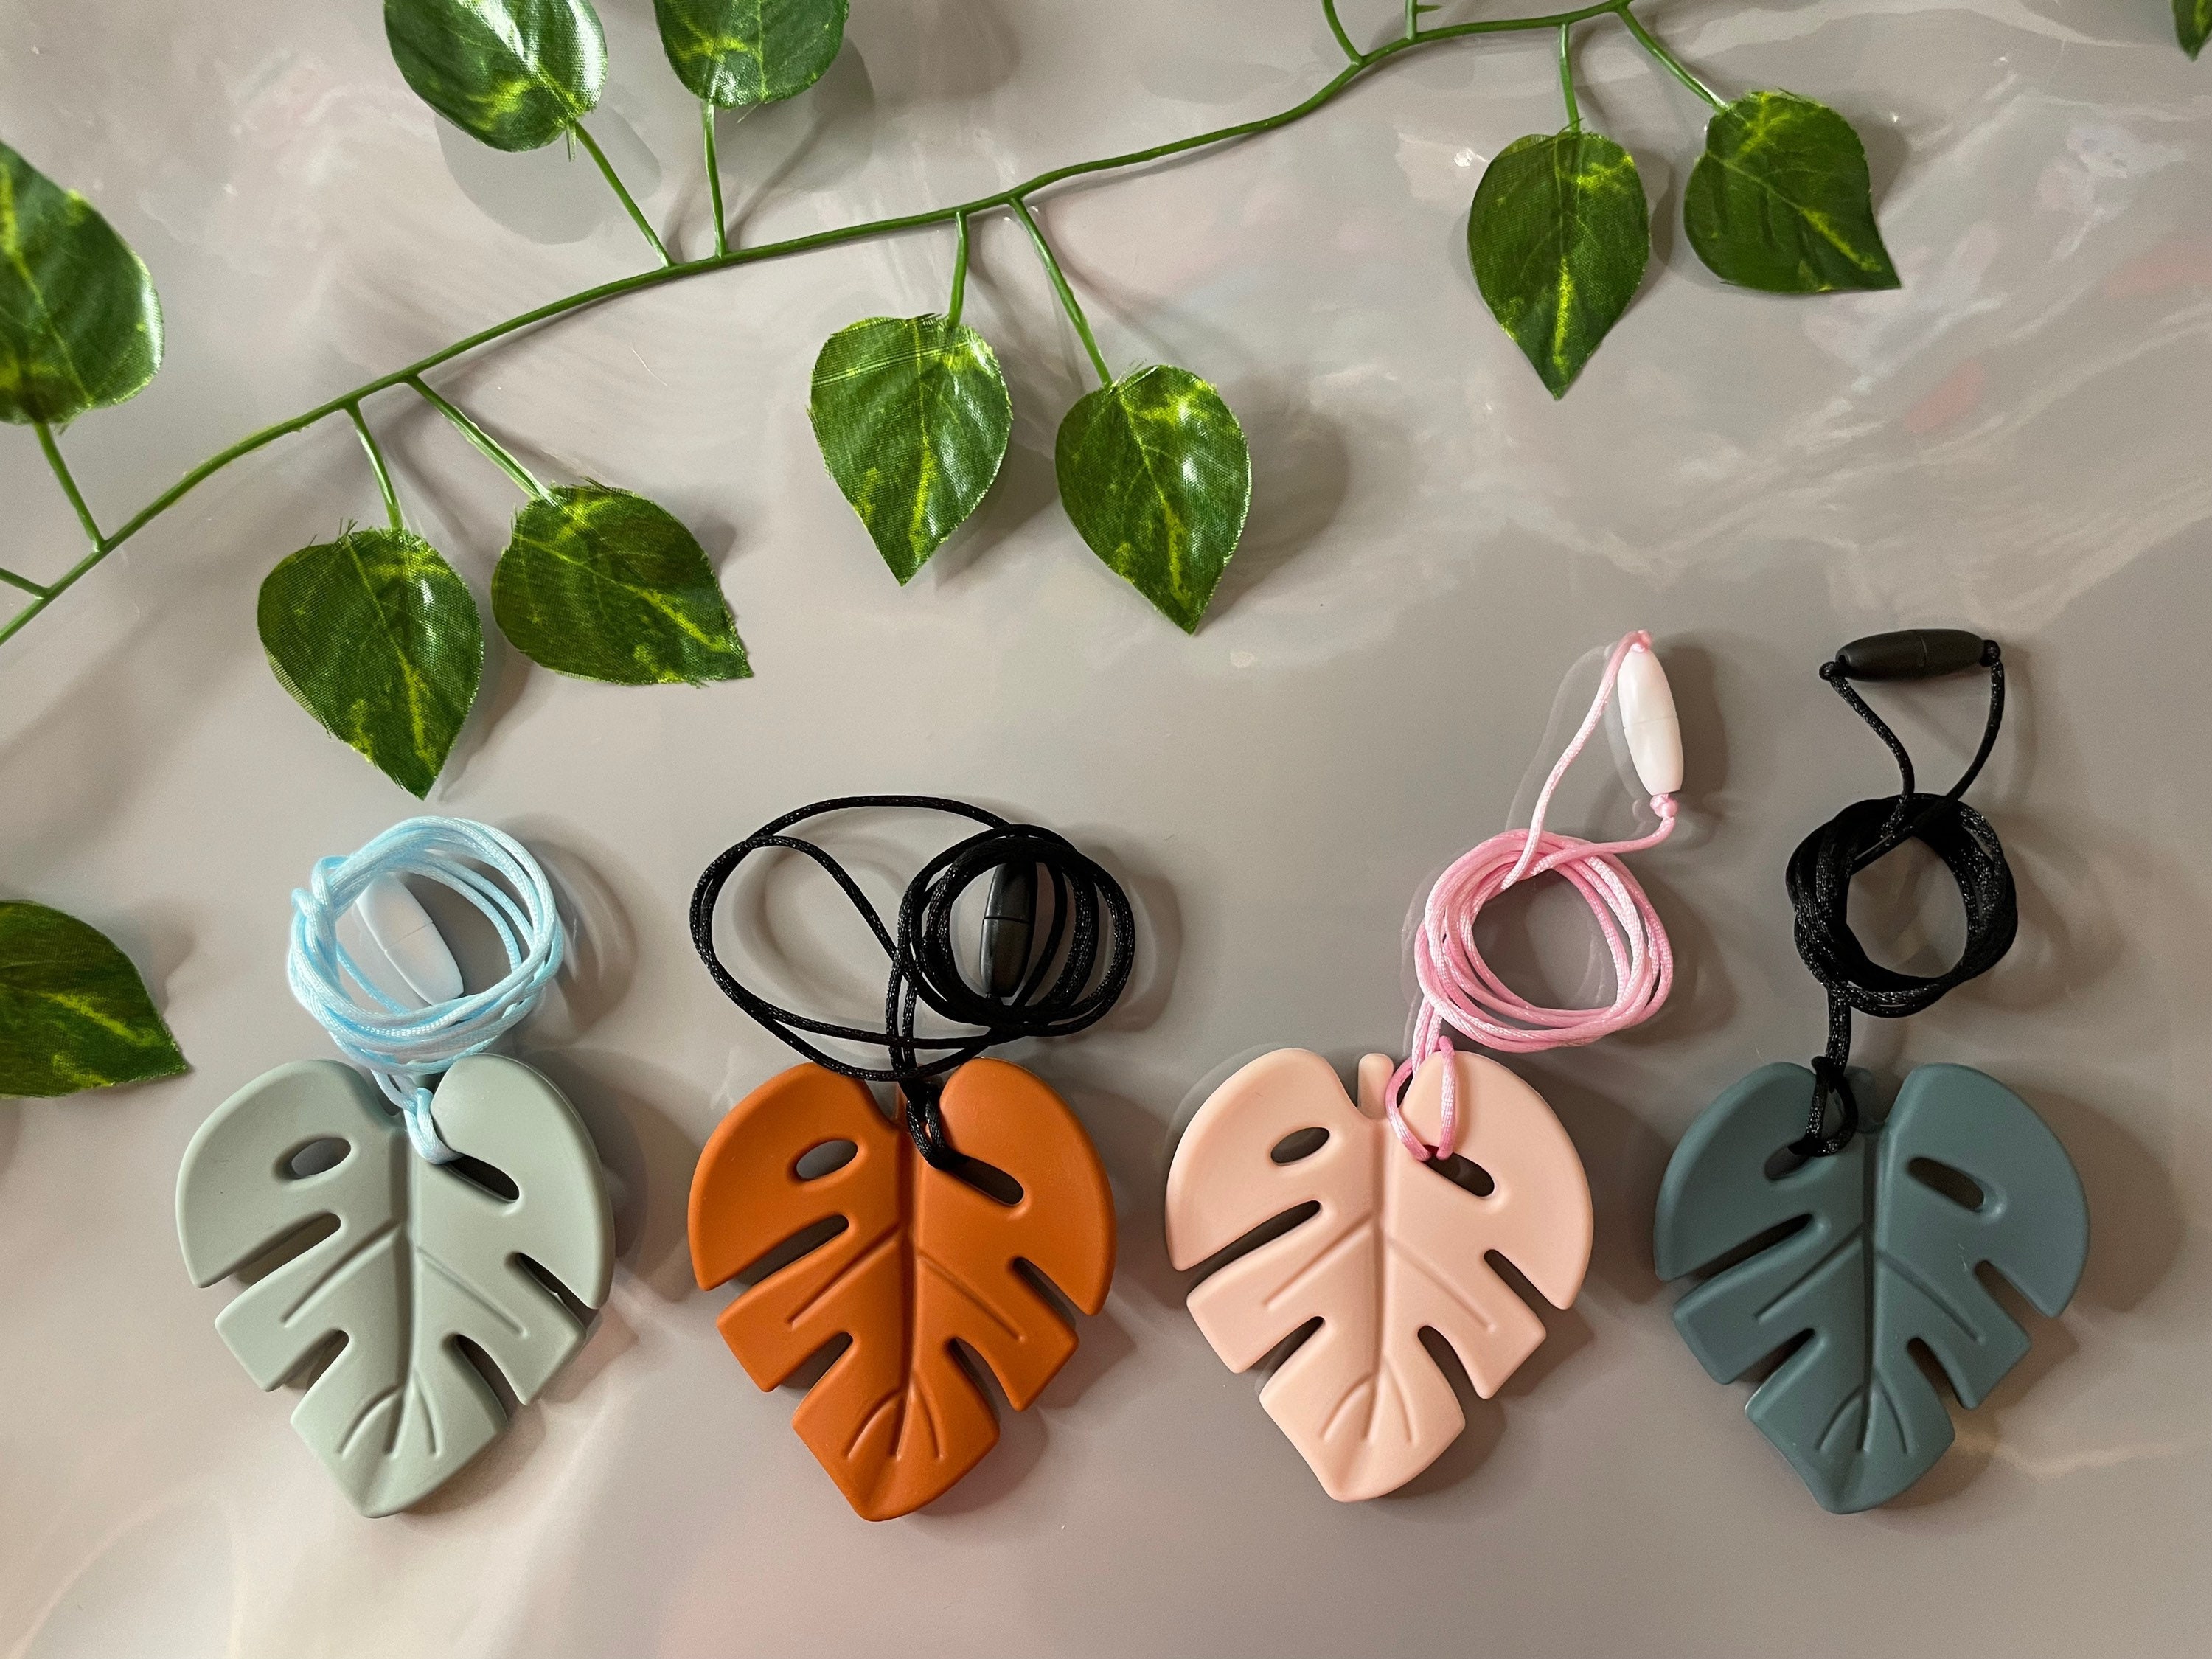 Buy Chewigem Raindrop Pendant - Super Tough, Discreet, Chewable Necklace &  Stimming Aid for Anxiety Reduction & Improved Focus. Calming Aid for  Sensory Processing Difficulties, Autism, ADHD. Blues & Greens. Online at